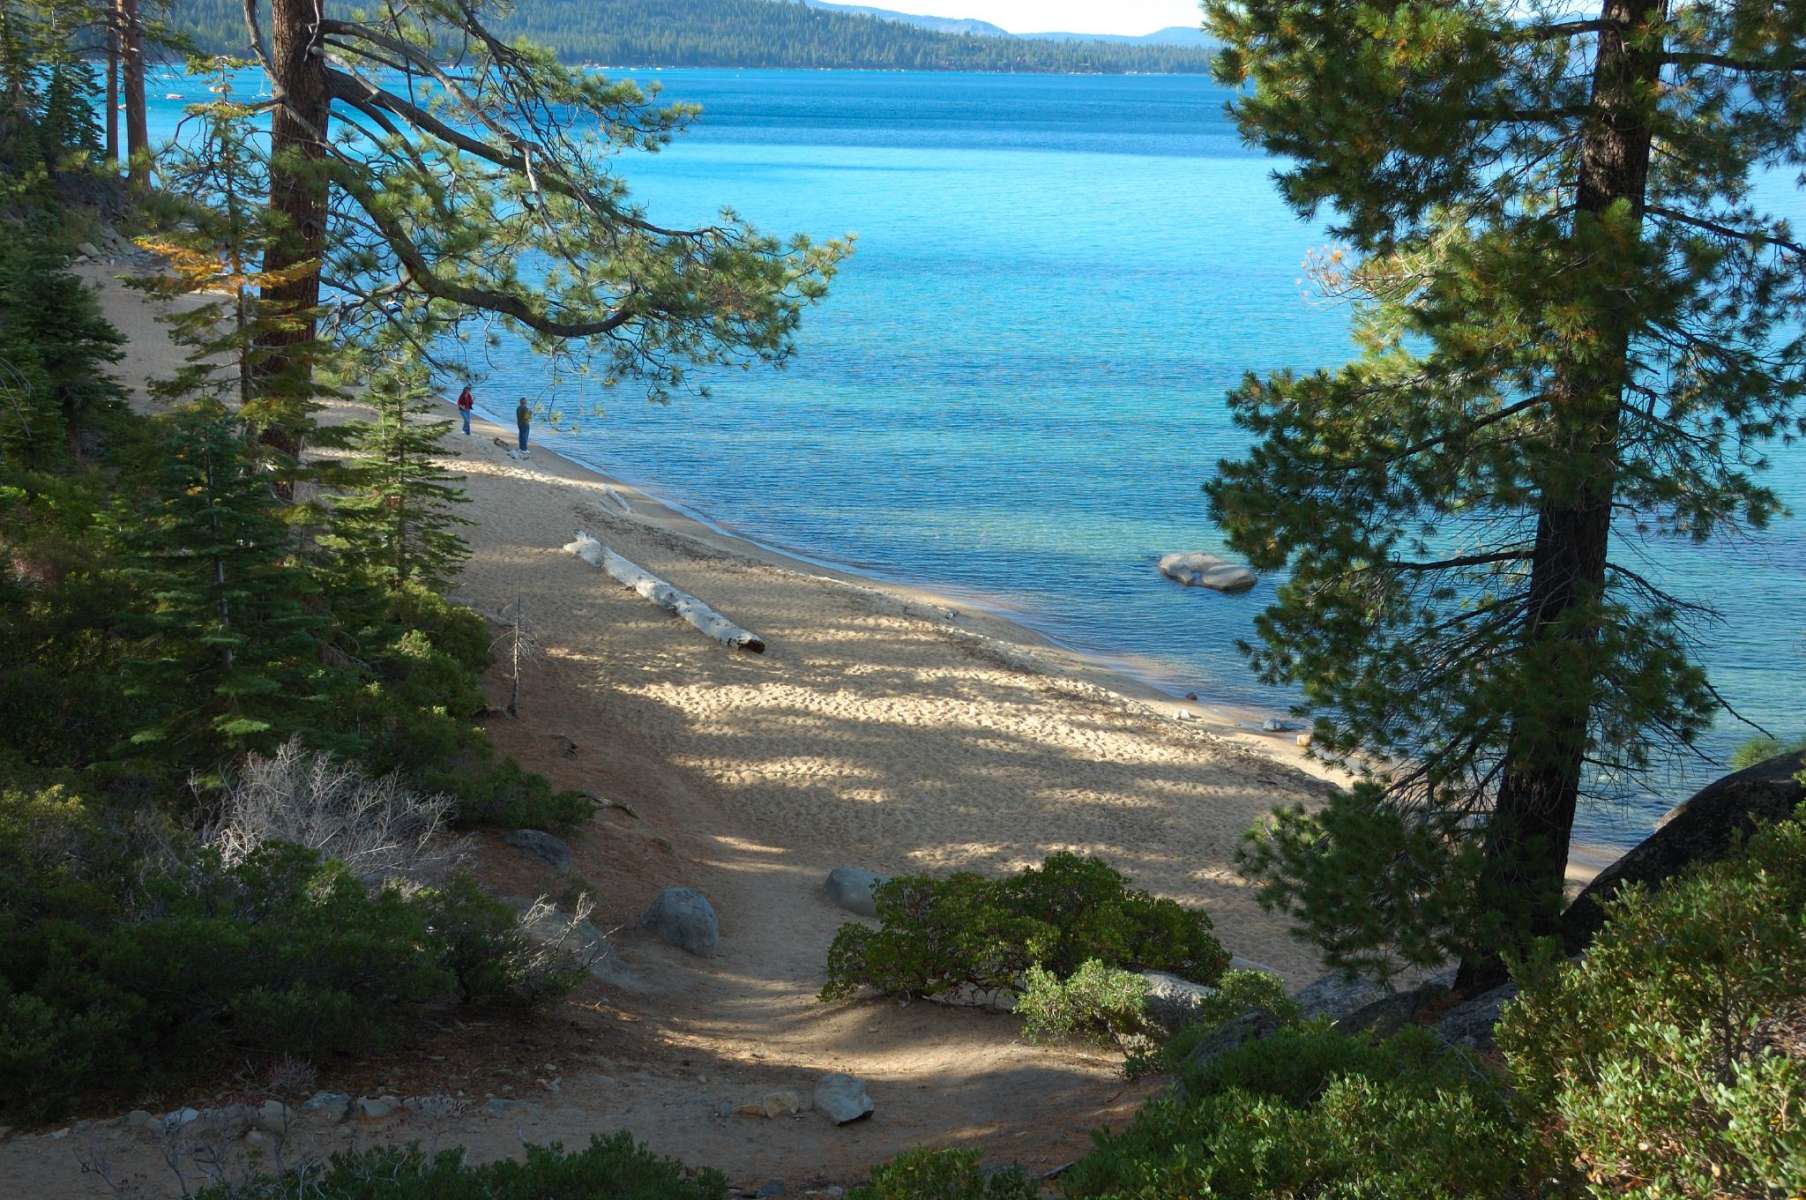 D.L. Bliss State Park Campground, South Lake Tahoe is one of the best camping spots in Northern California